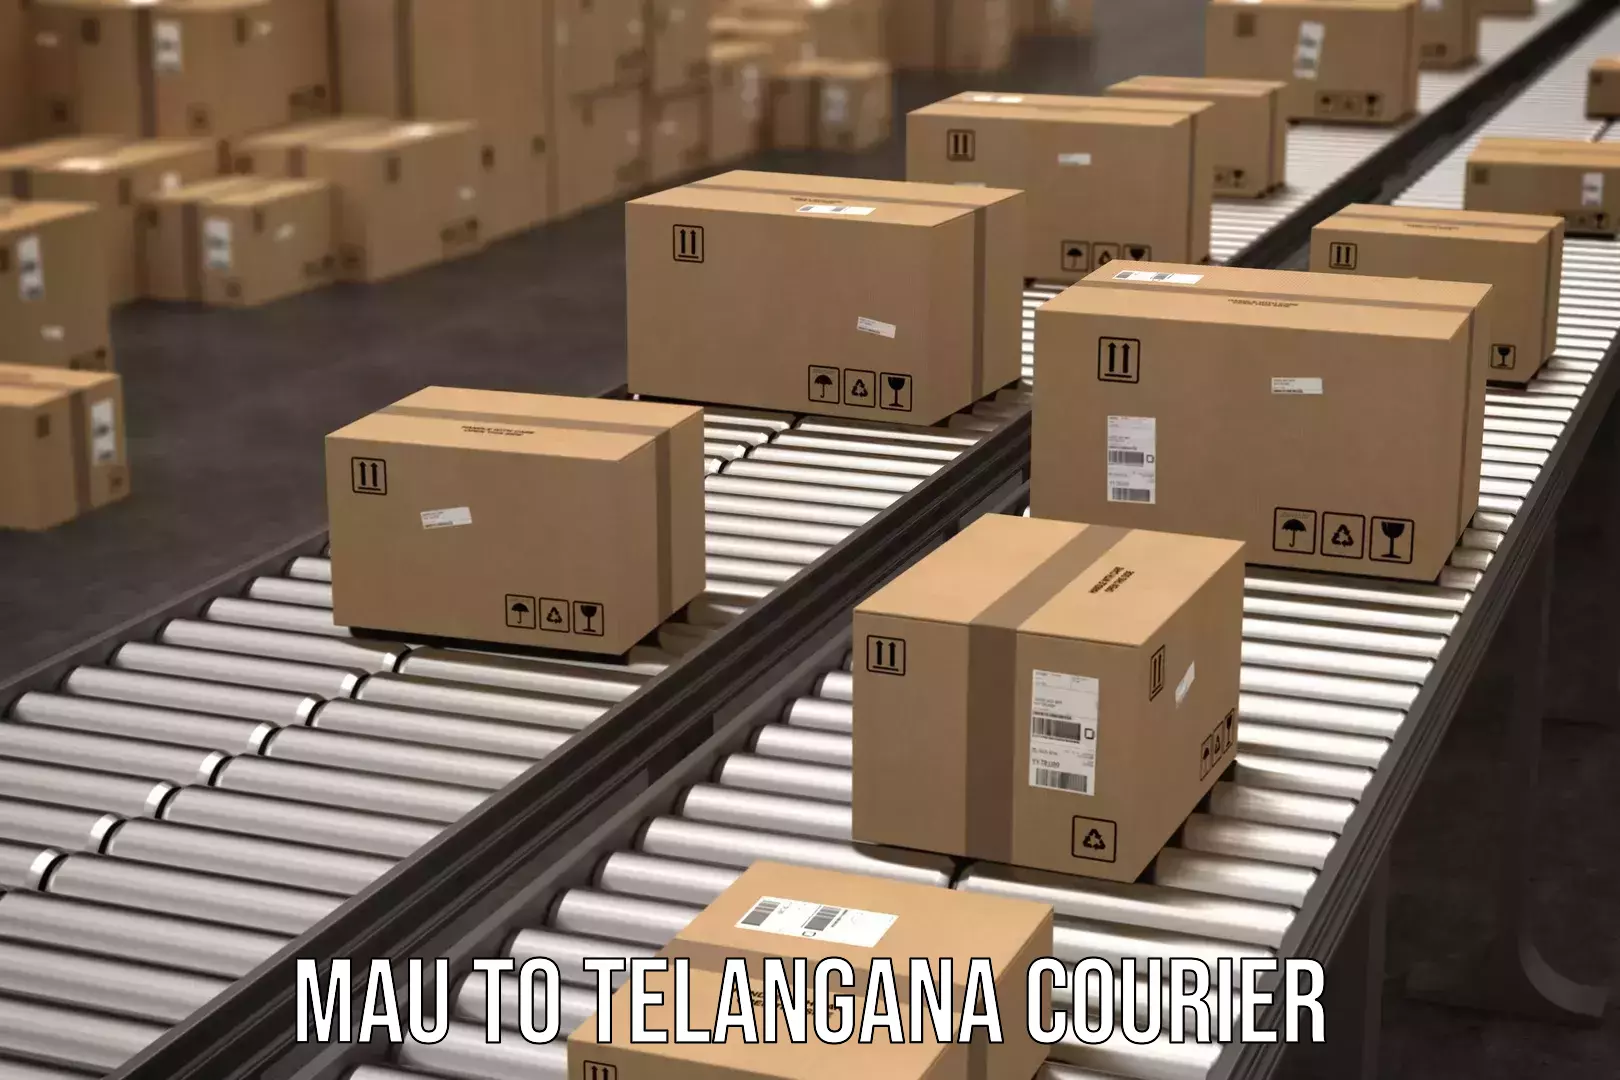 Courier service efficiency in Mau to Narmetta